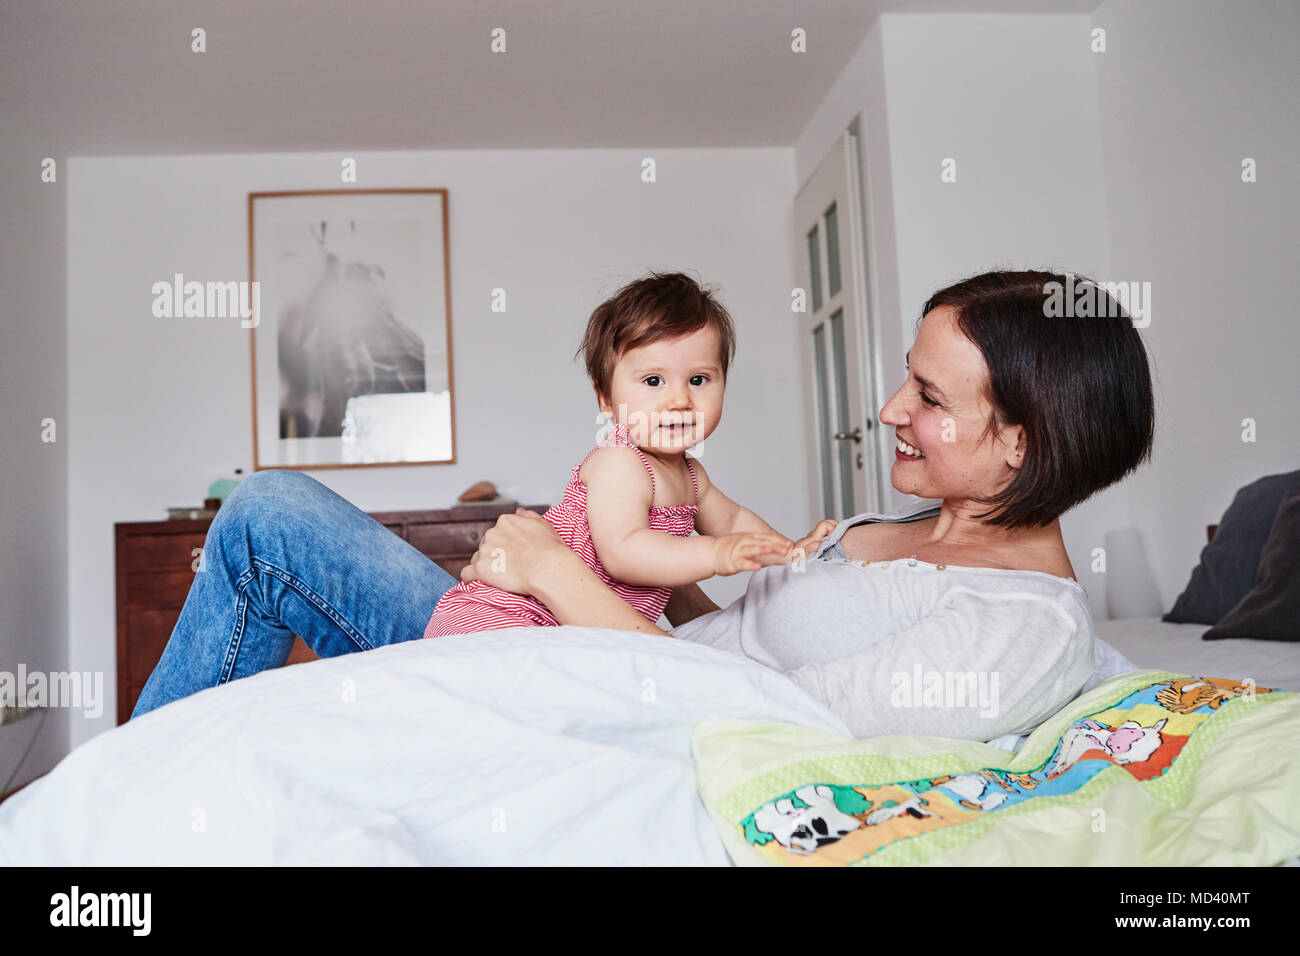 Mother and baby daughter relaxing on bed Stock Photo